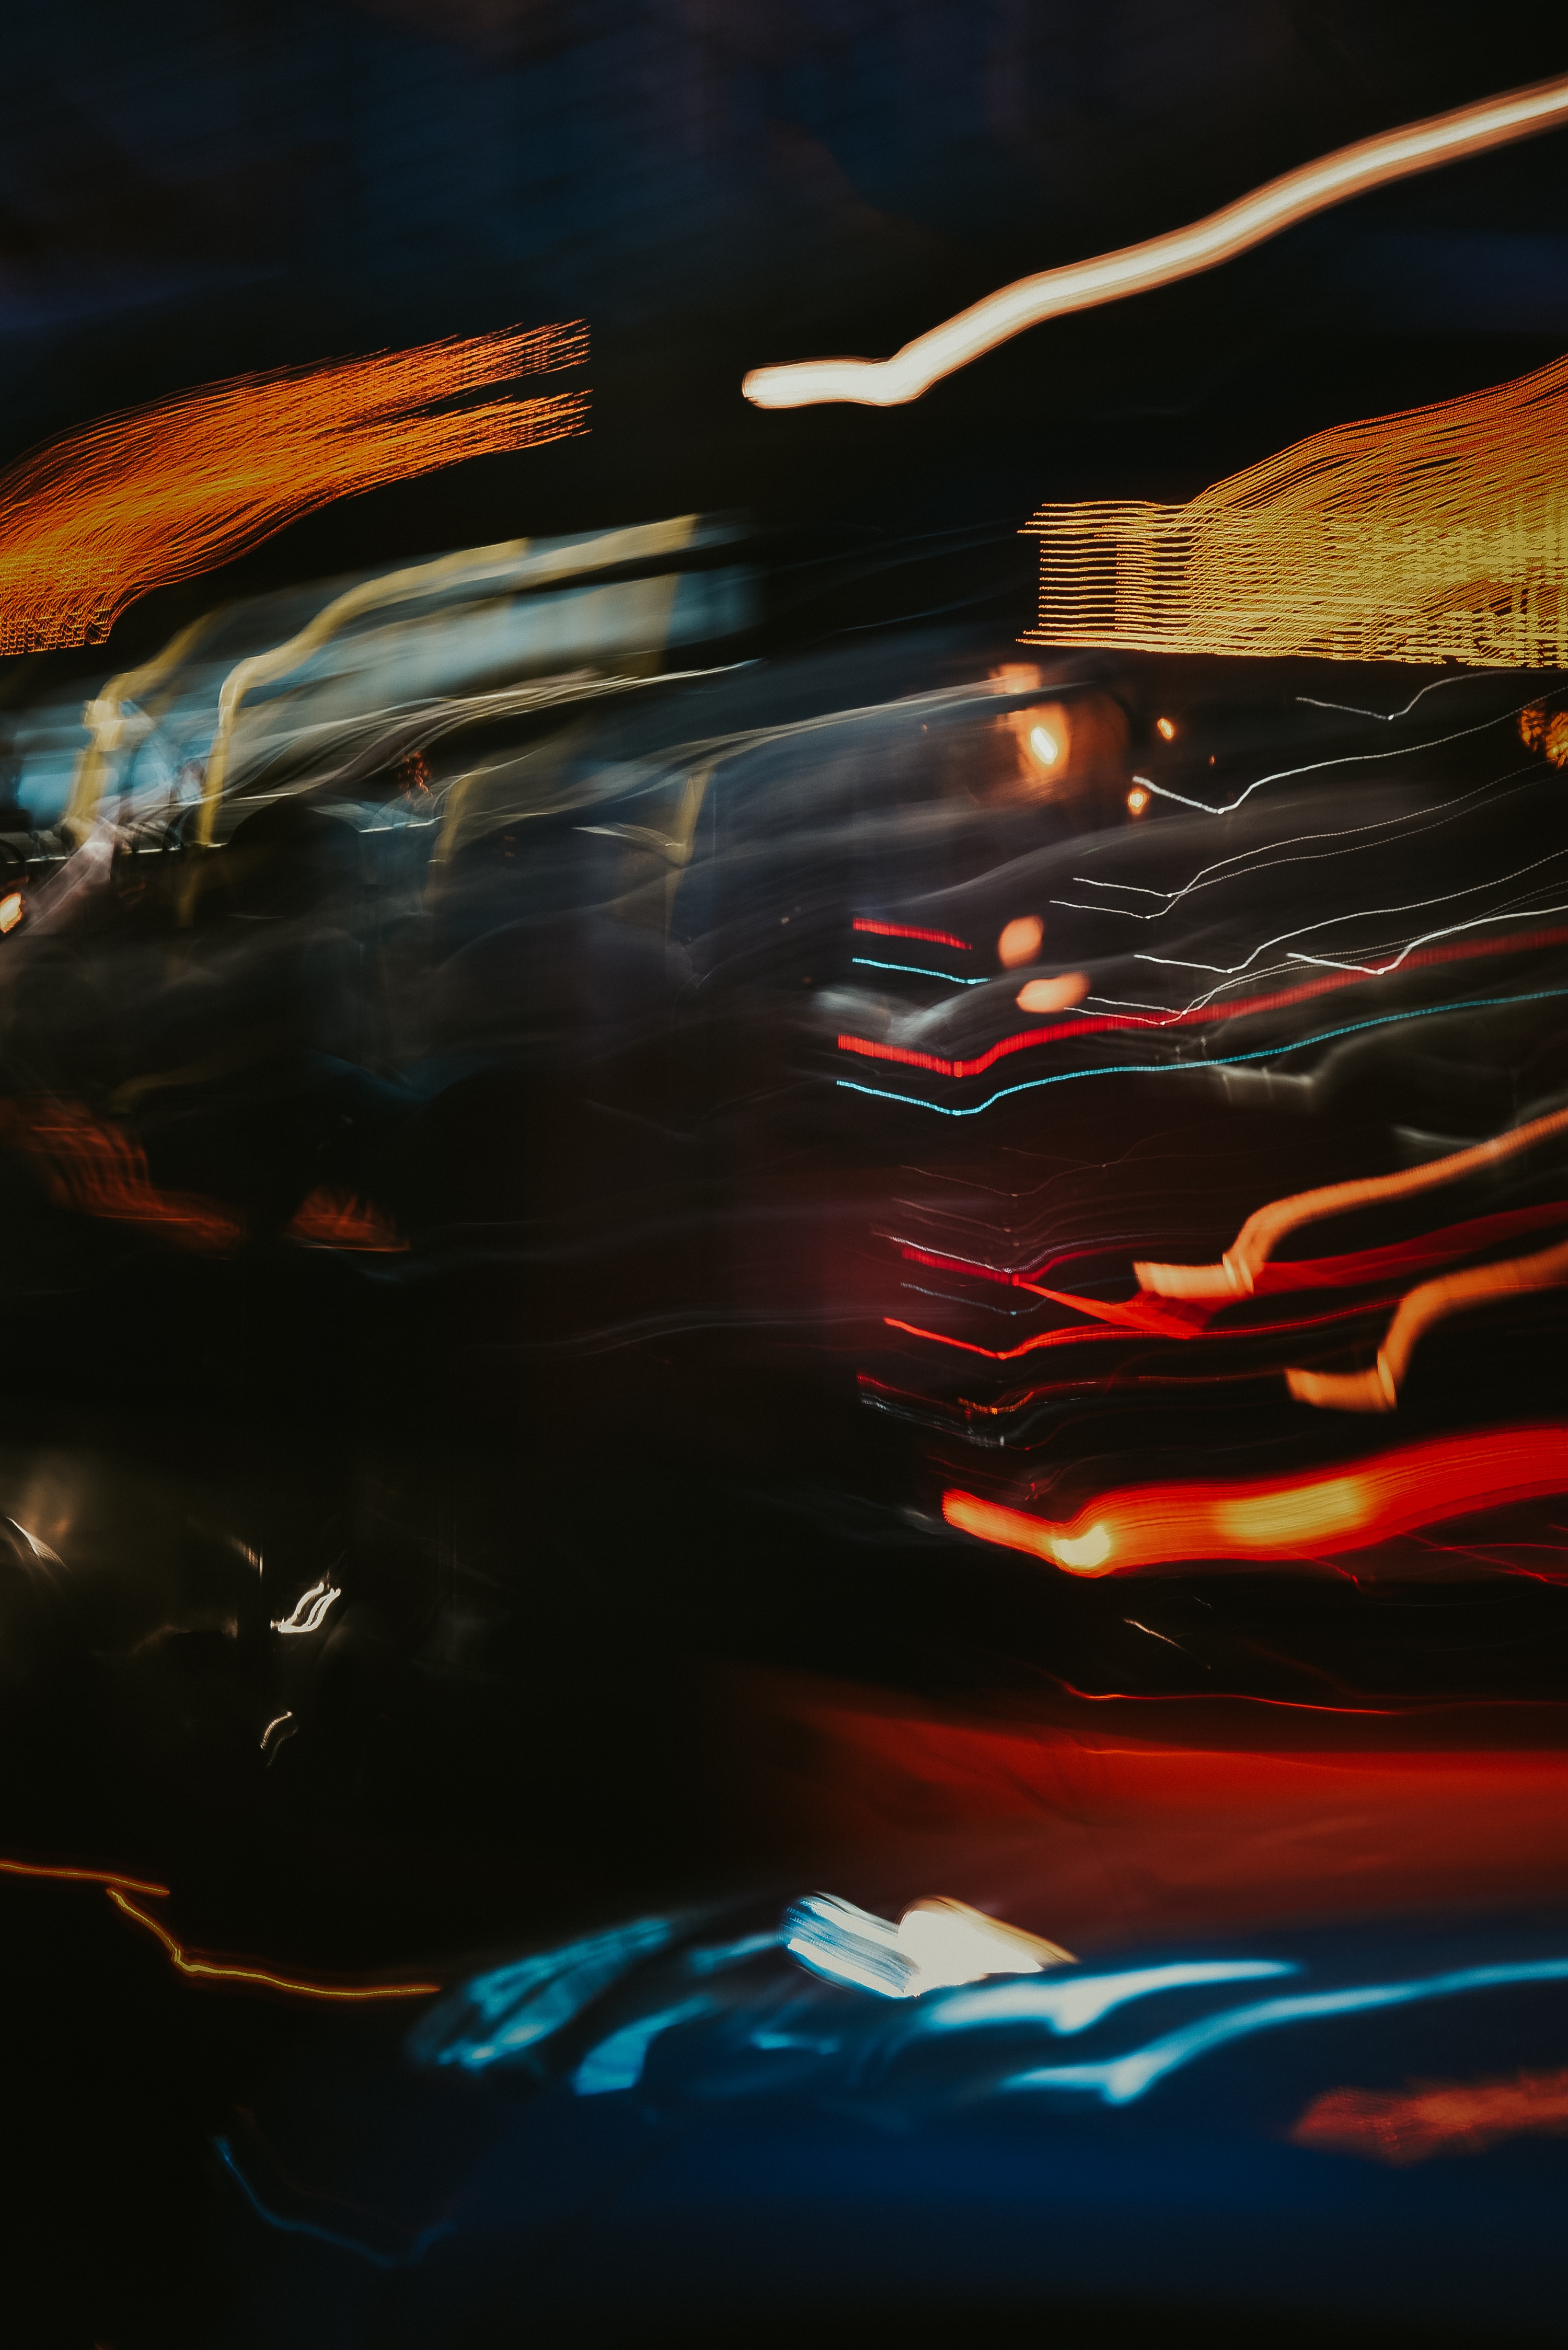 distortion, blur, shine, abstract, light, traffic, movement, smooth, long exposure